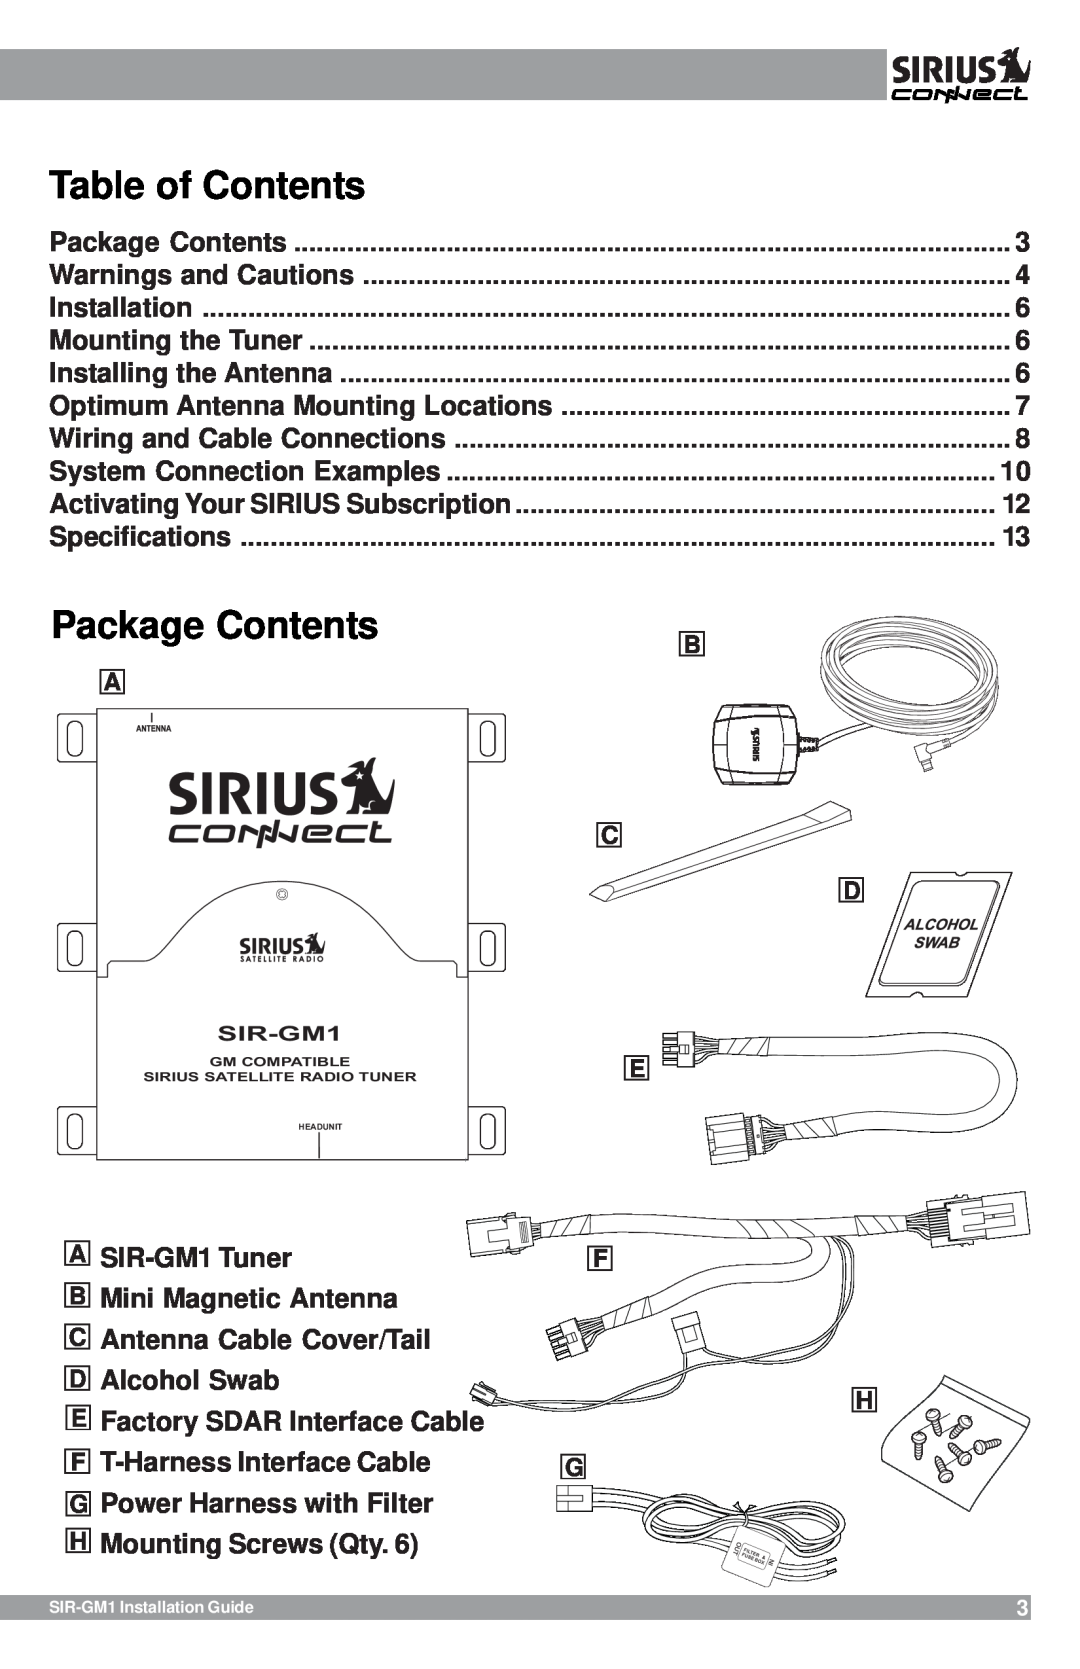 Sirius Satellite Radio SIR-GM1 manual Package Contents, Table of Contents 